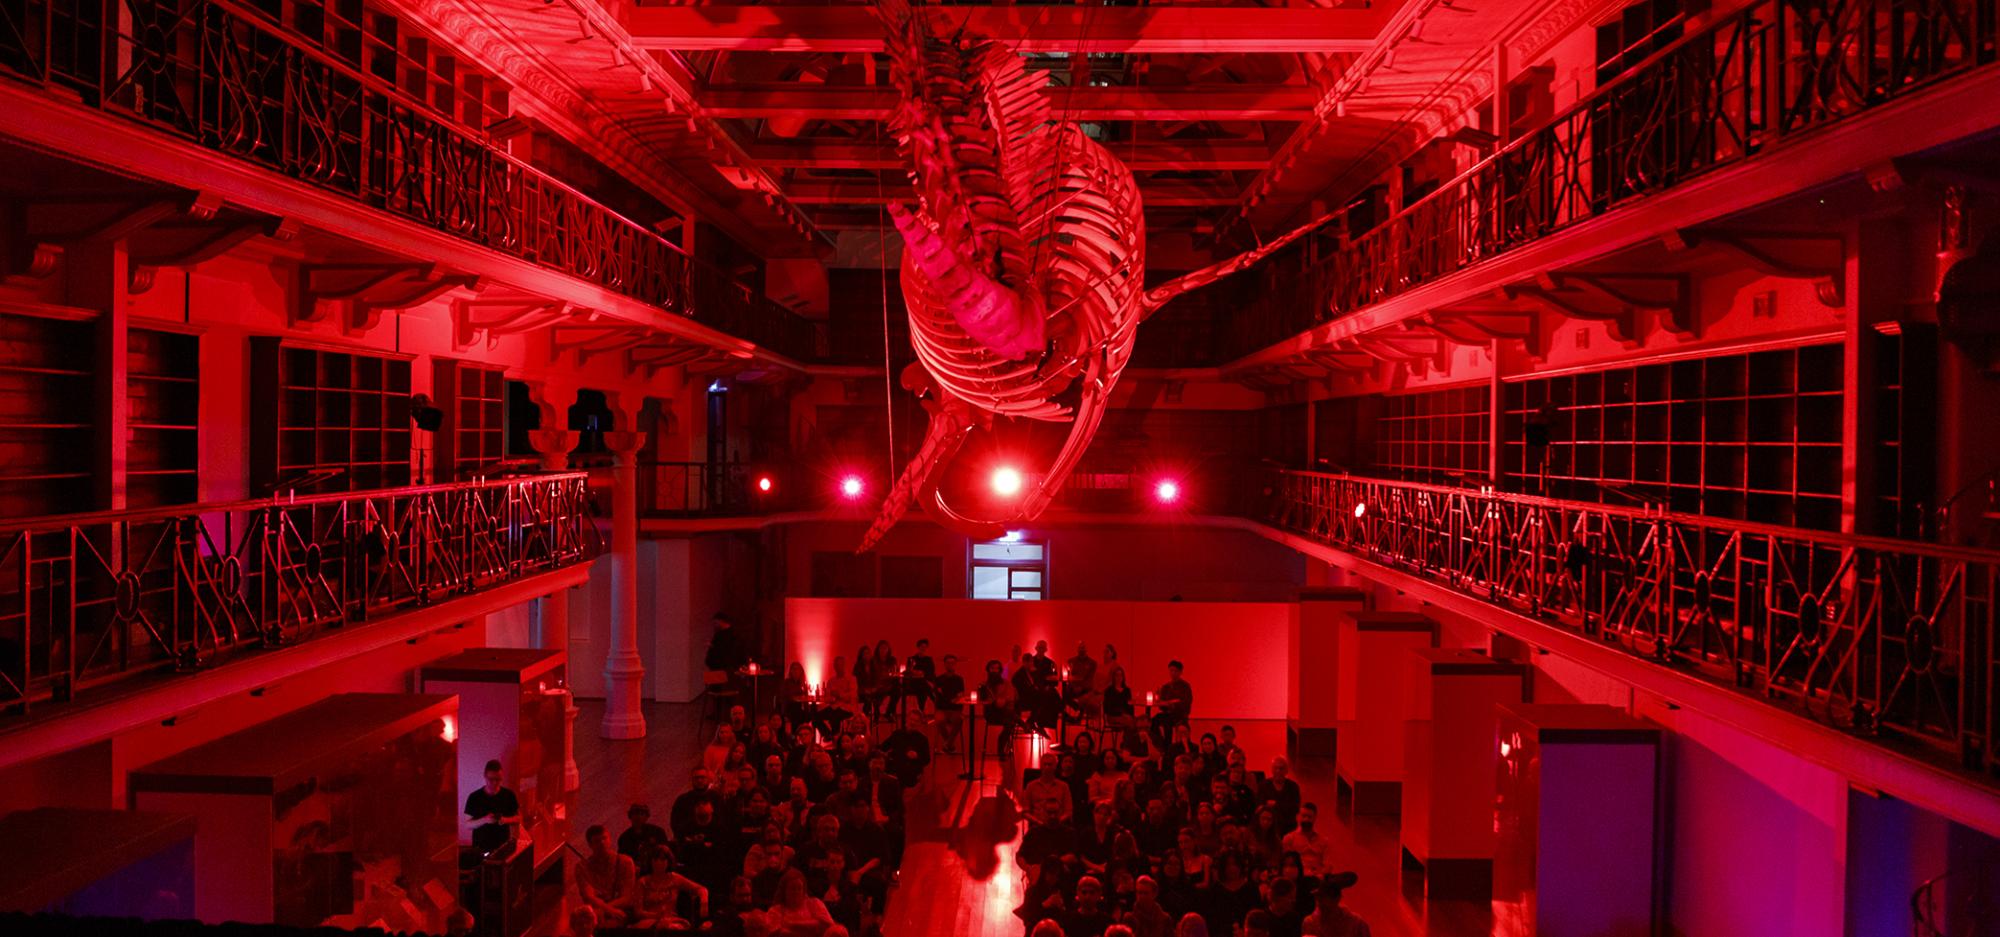 A large hall of people sitting in rows under a suspended whale skeleton in a heritage library building with empty book shelves. The whale and crowd is lit with a bright red light, giving the image a red glow